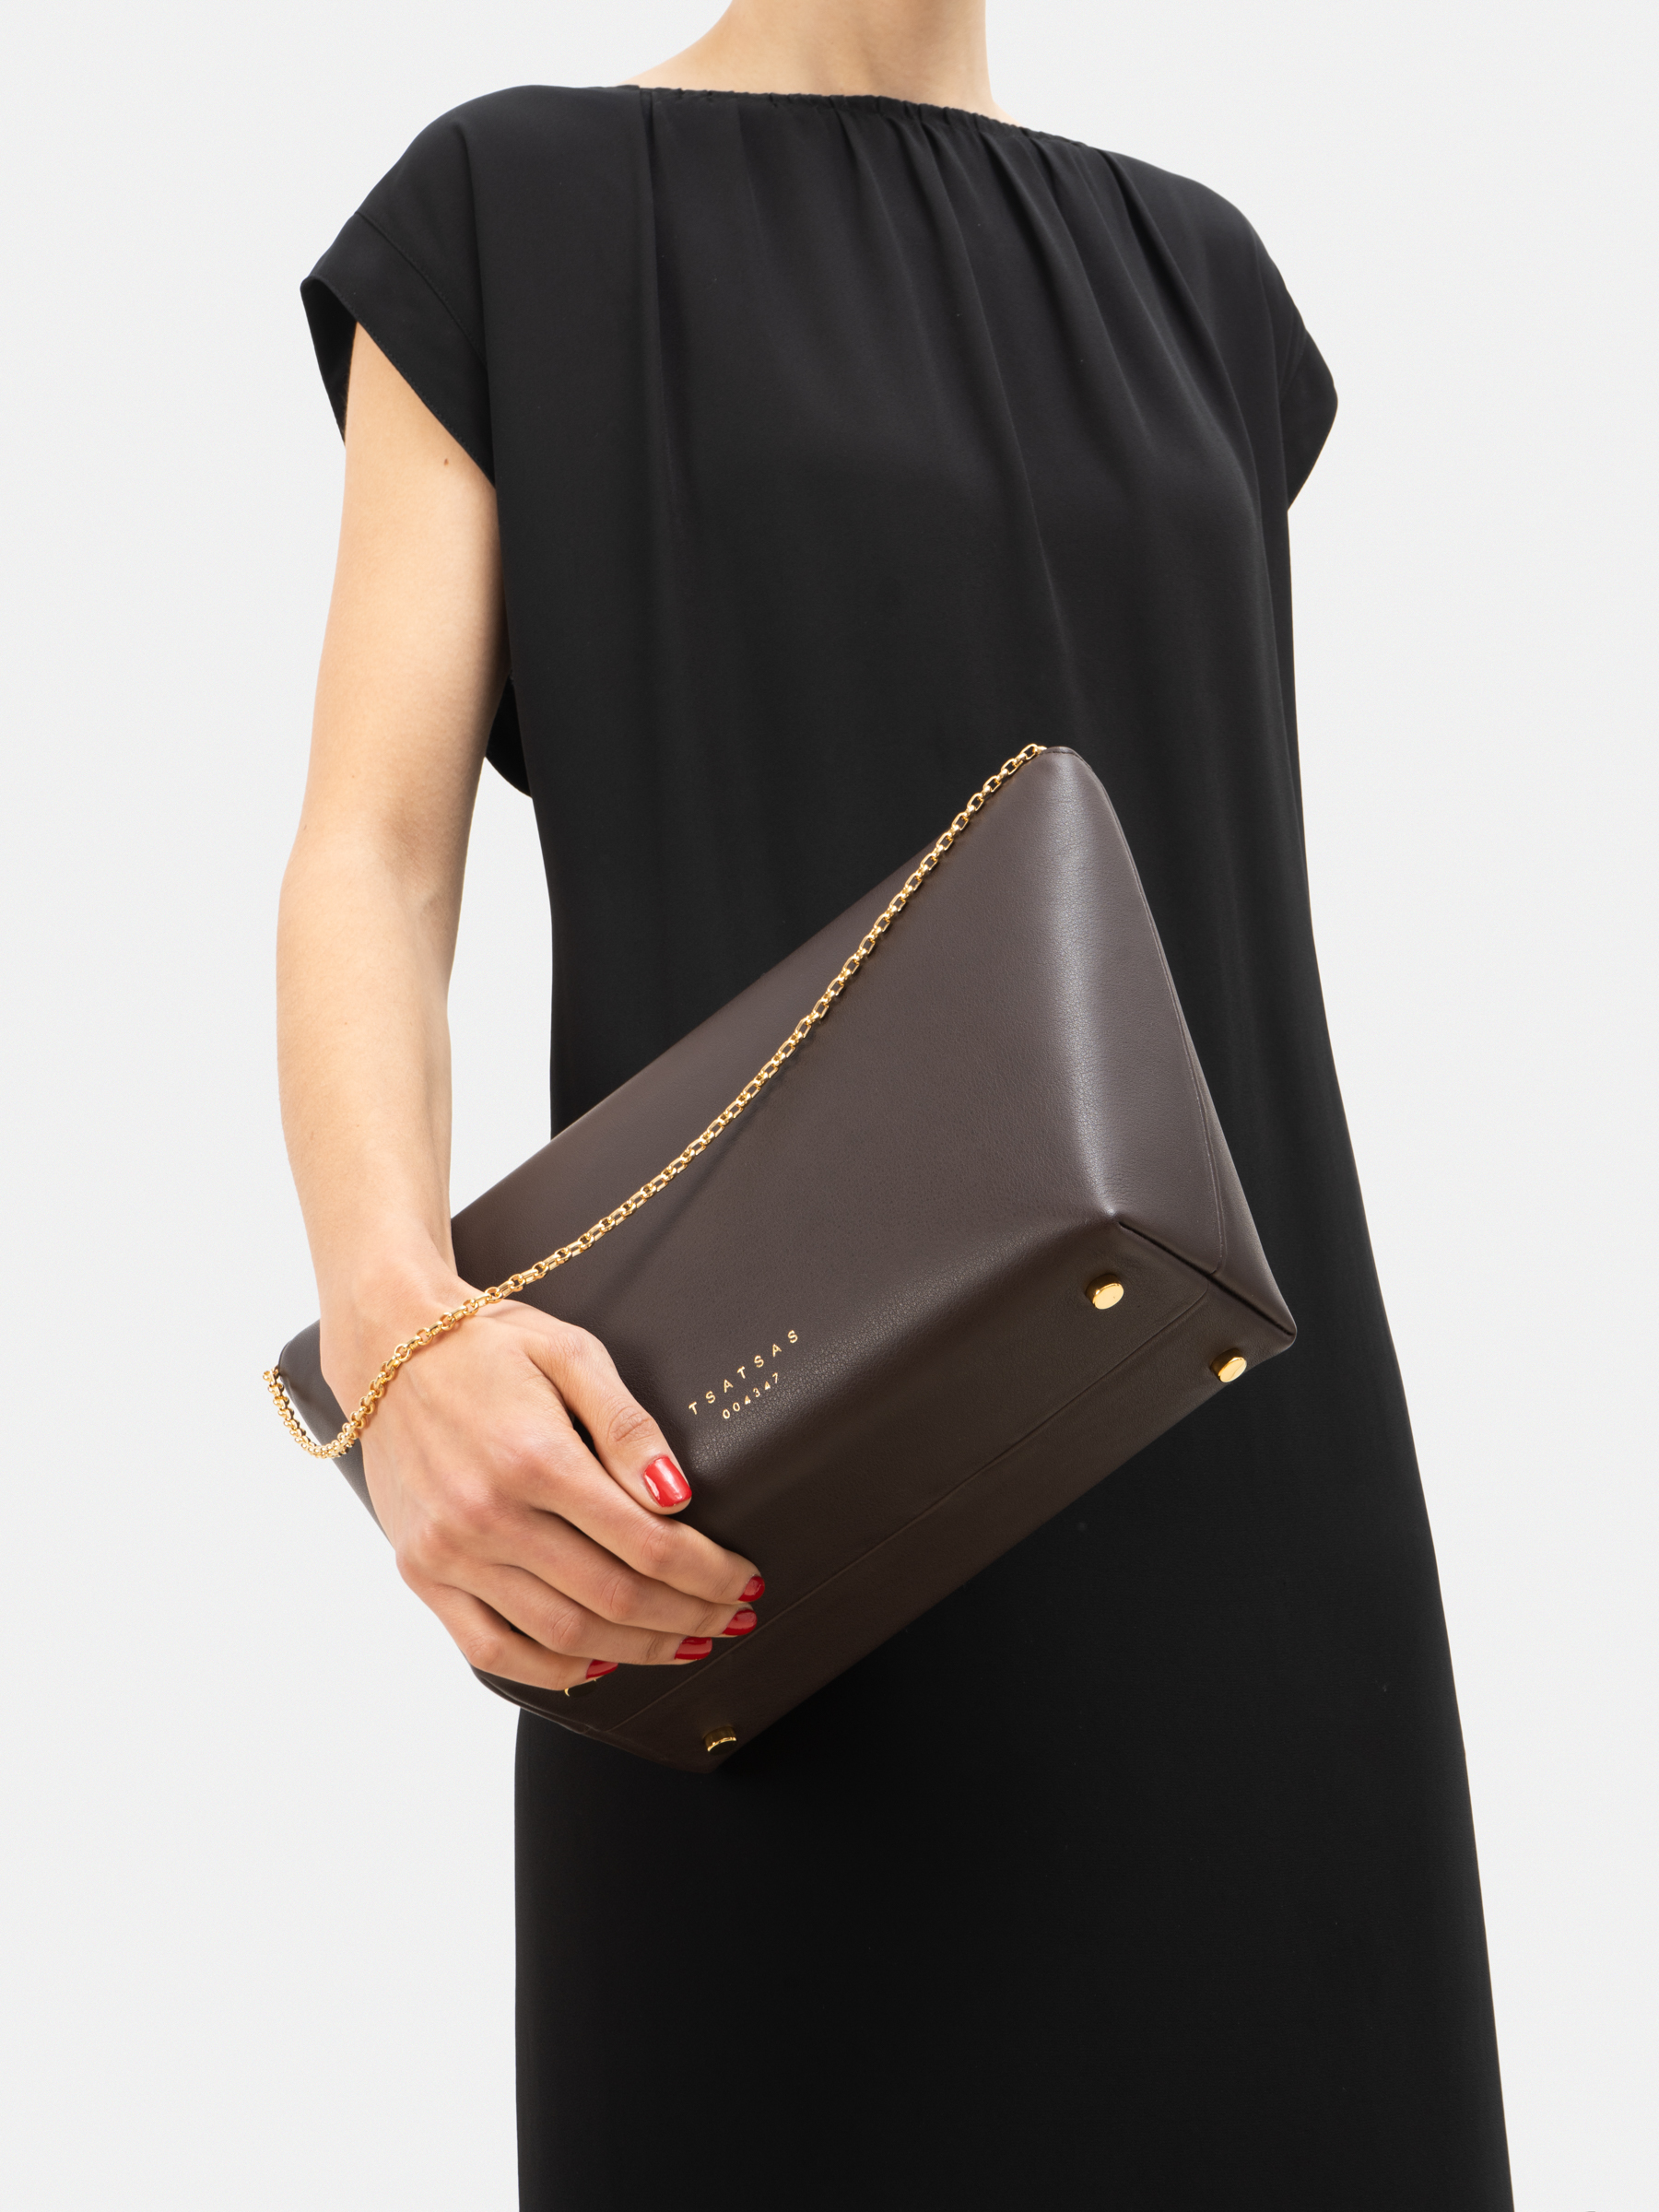 The Brown 2 Tone LV Bag is on 𝓣𝓻𝓮𝓷𝓭!! - Turning Heads Xo.